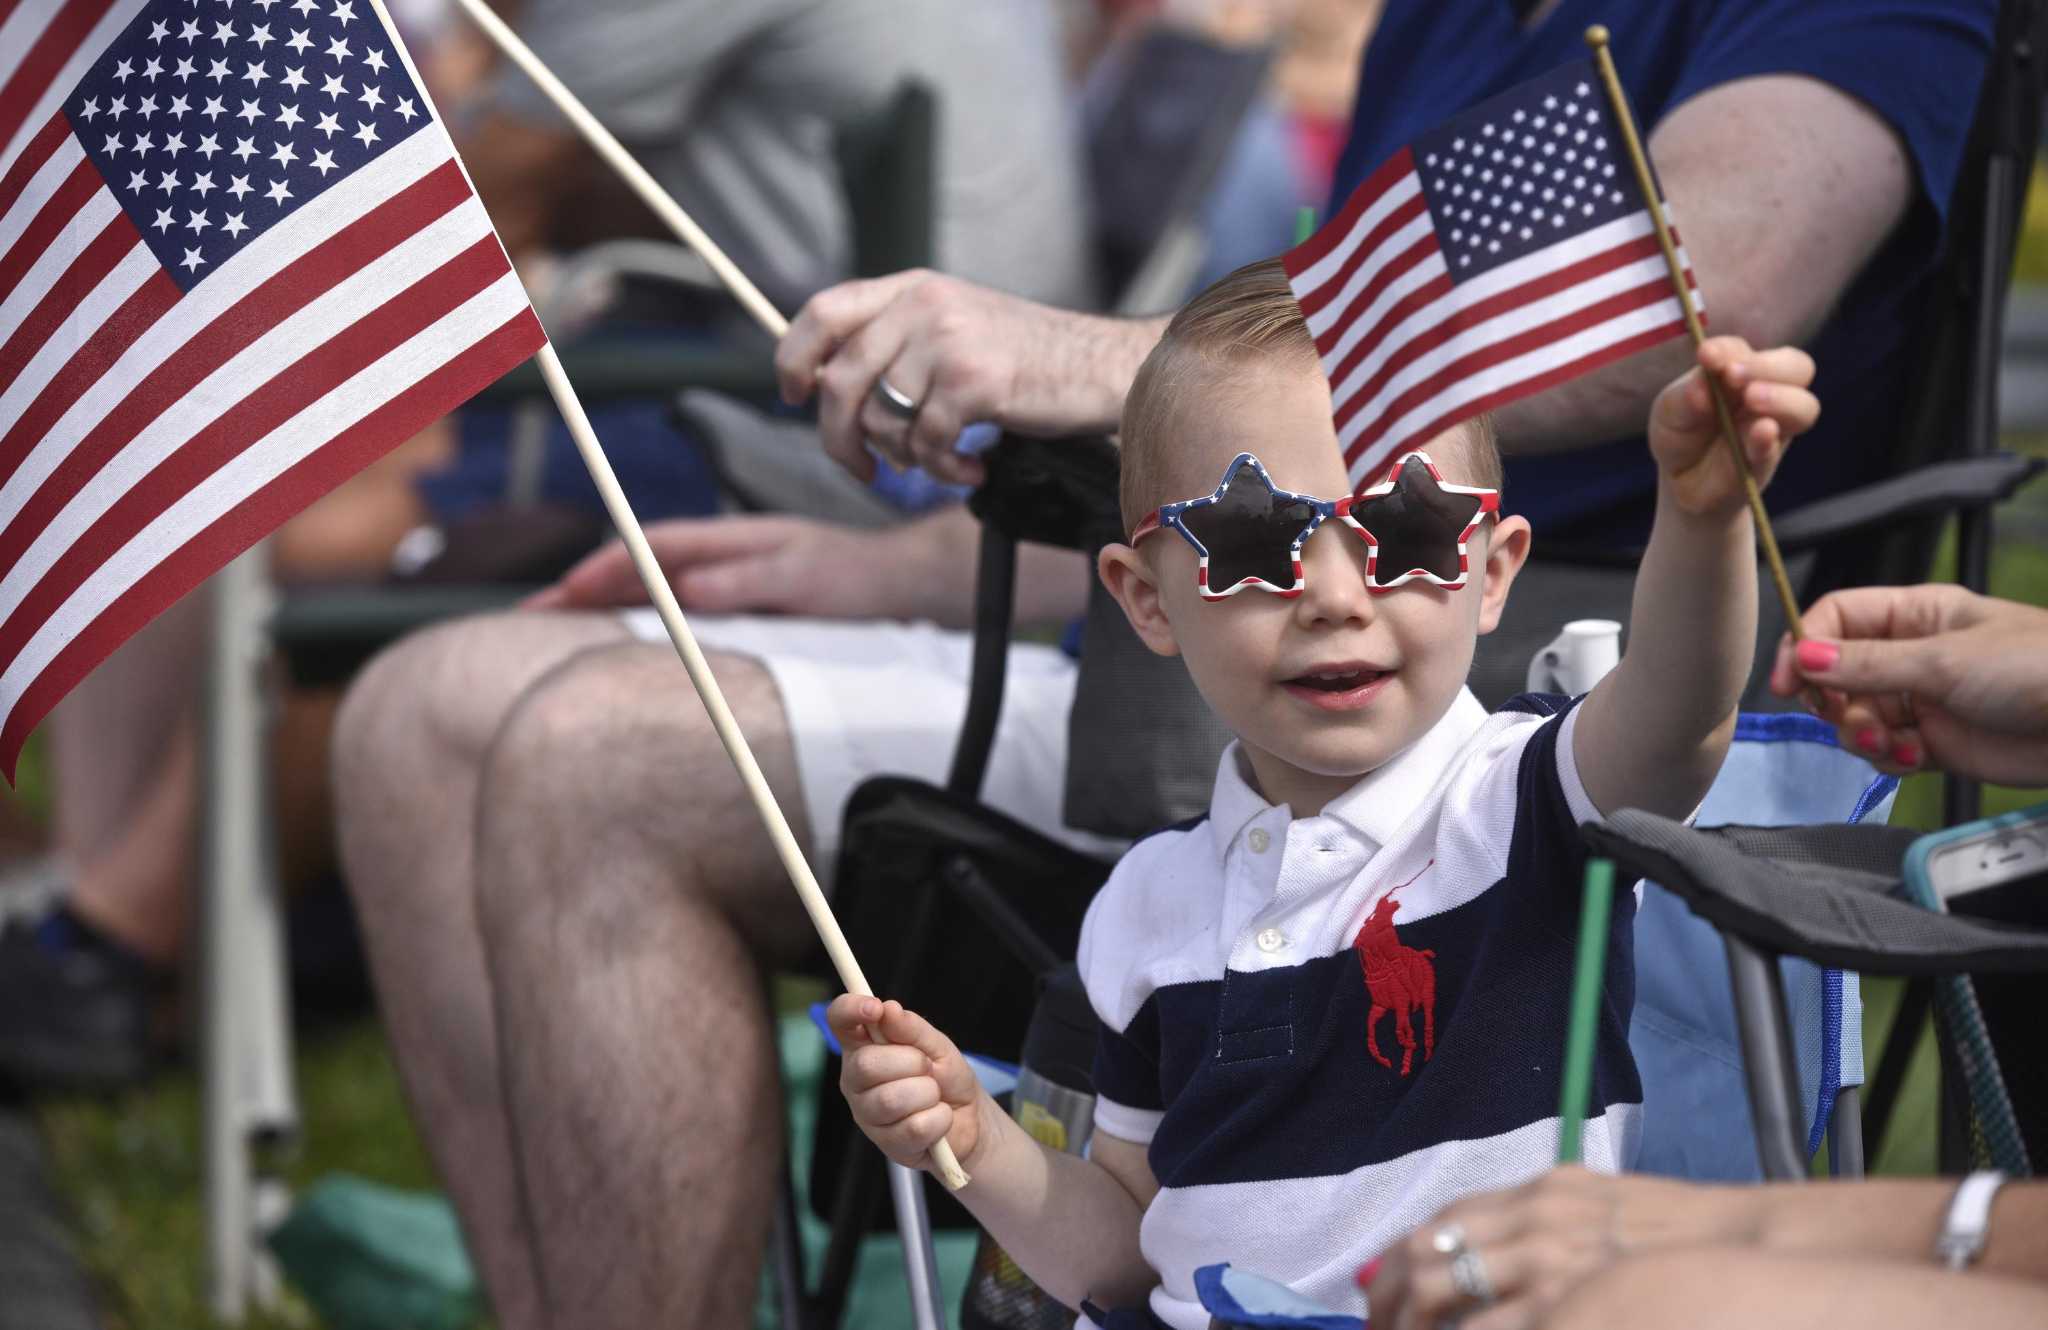 New Fairfield Fourth of July parade a long tradition